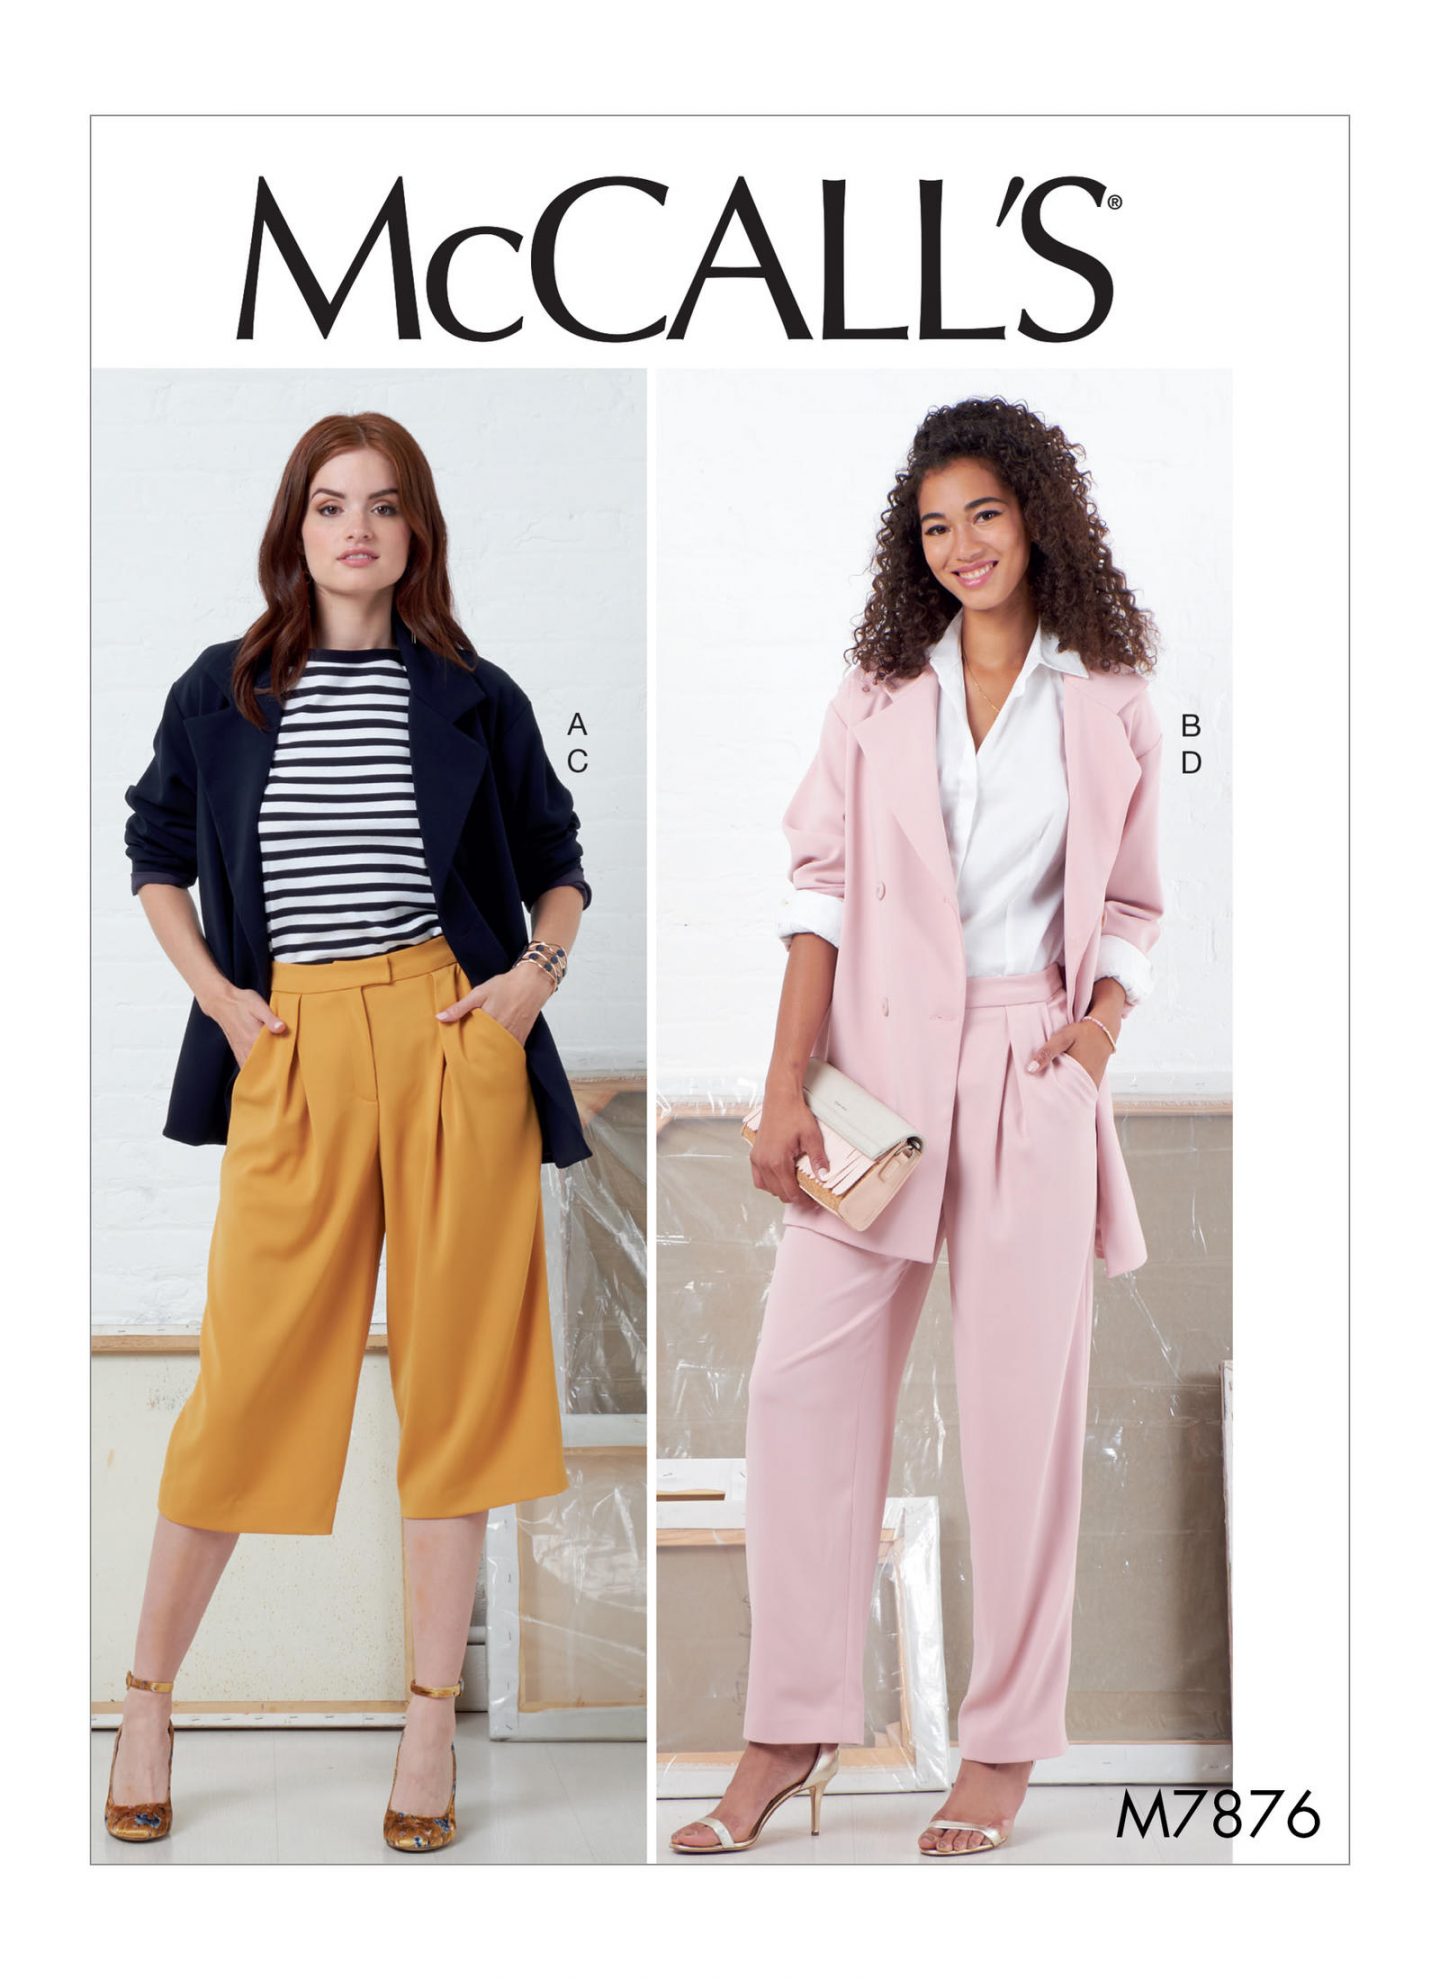 McCalls 7876 Spring trends 2019 to inspire your sewing